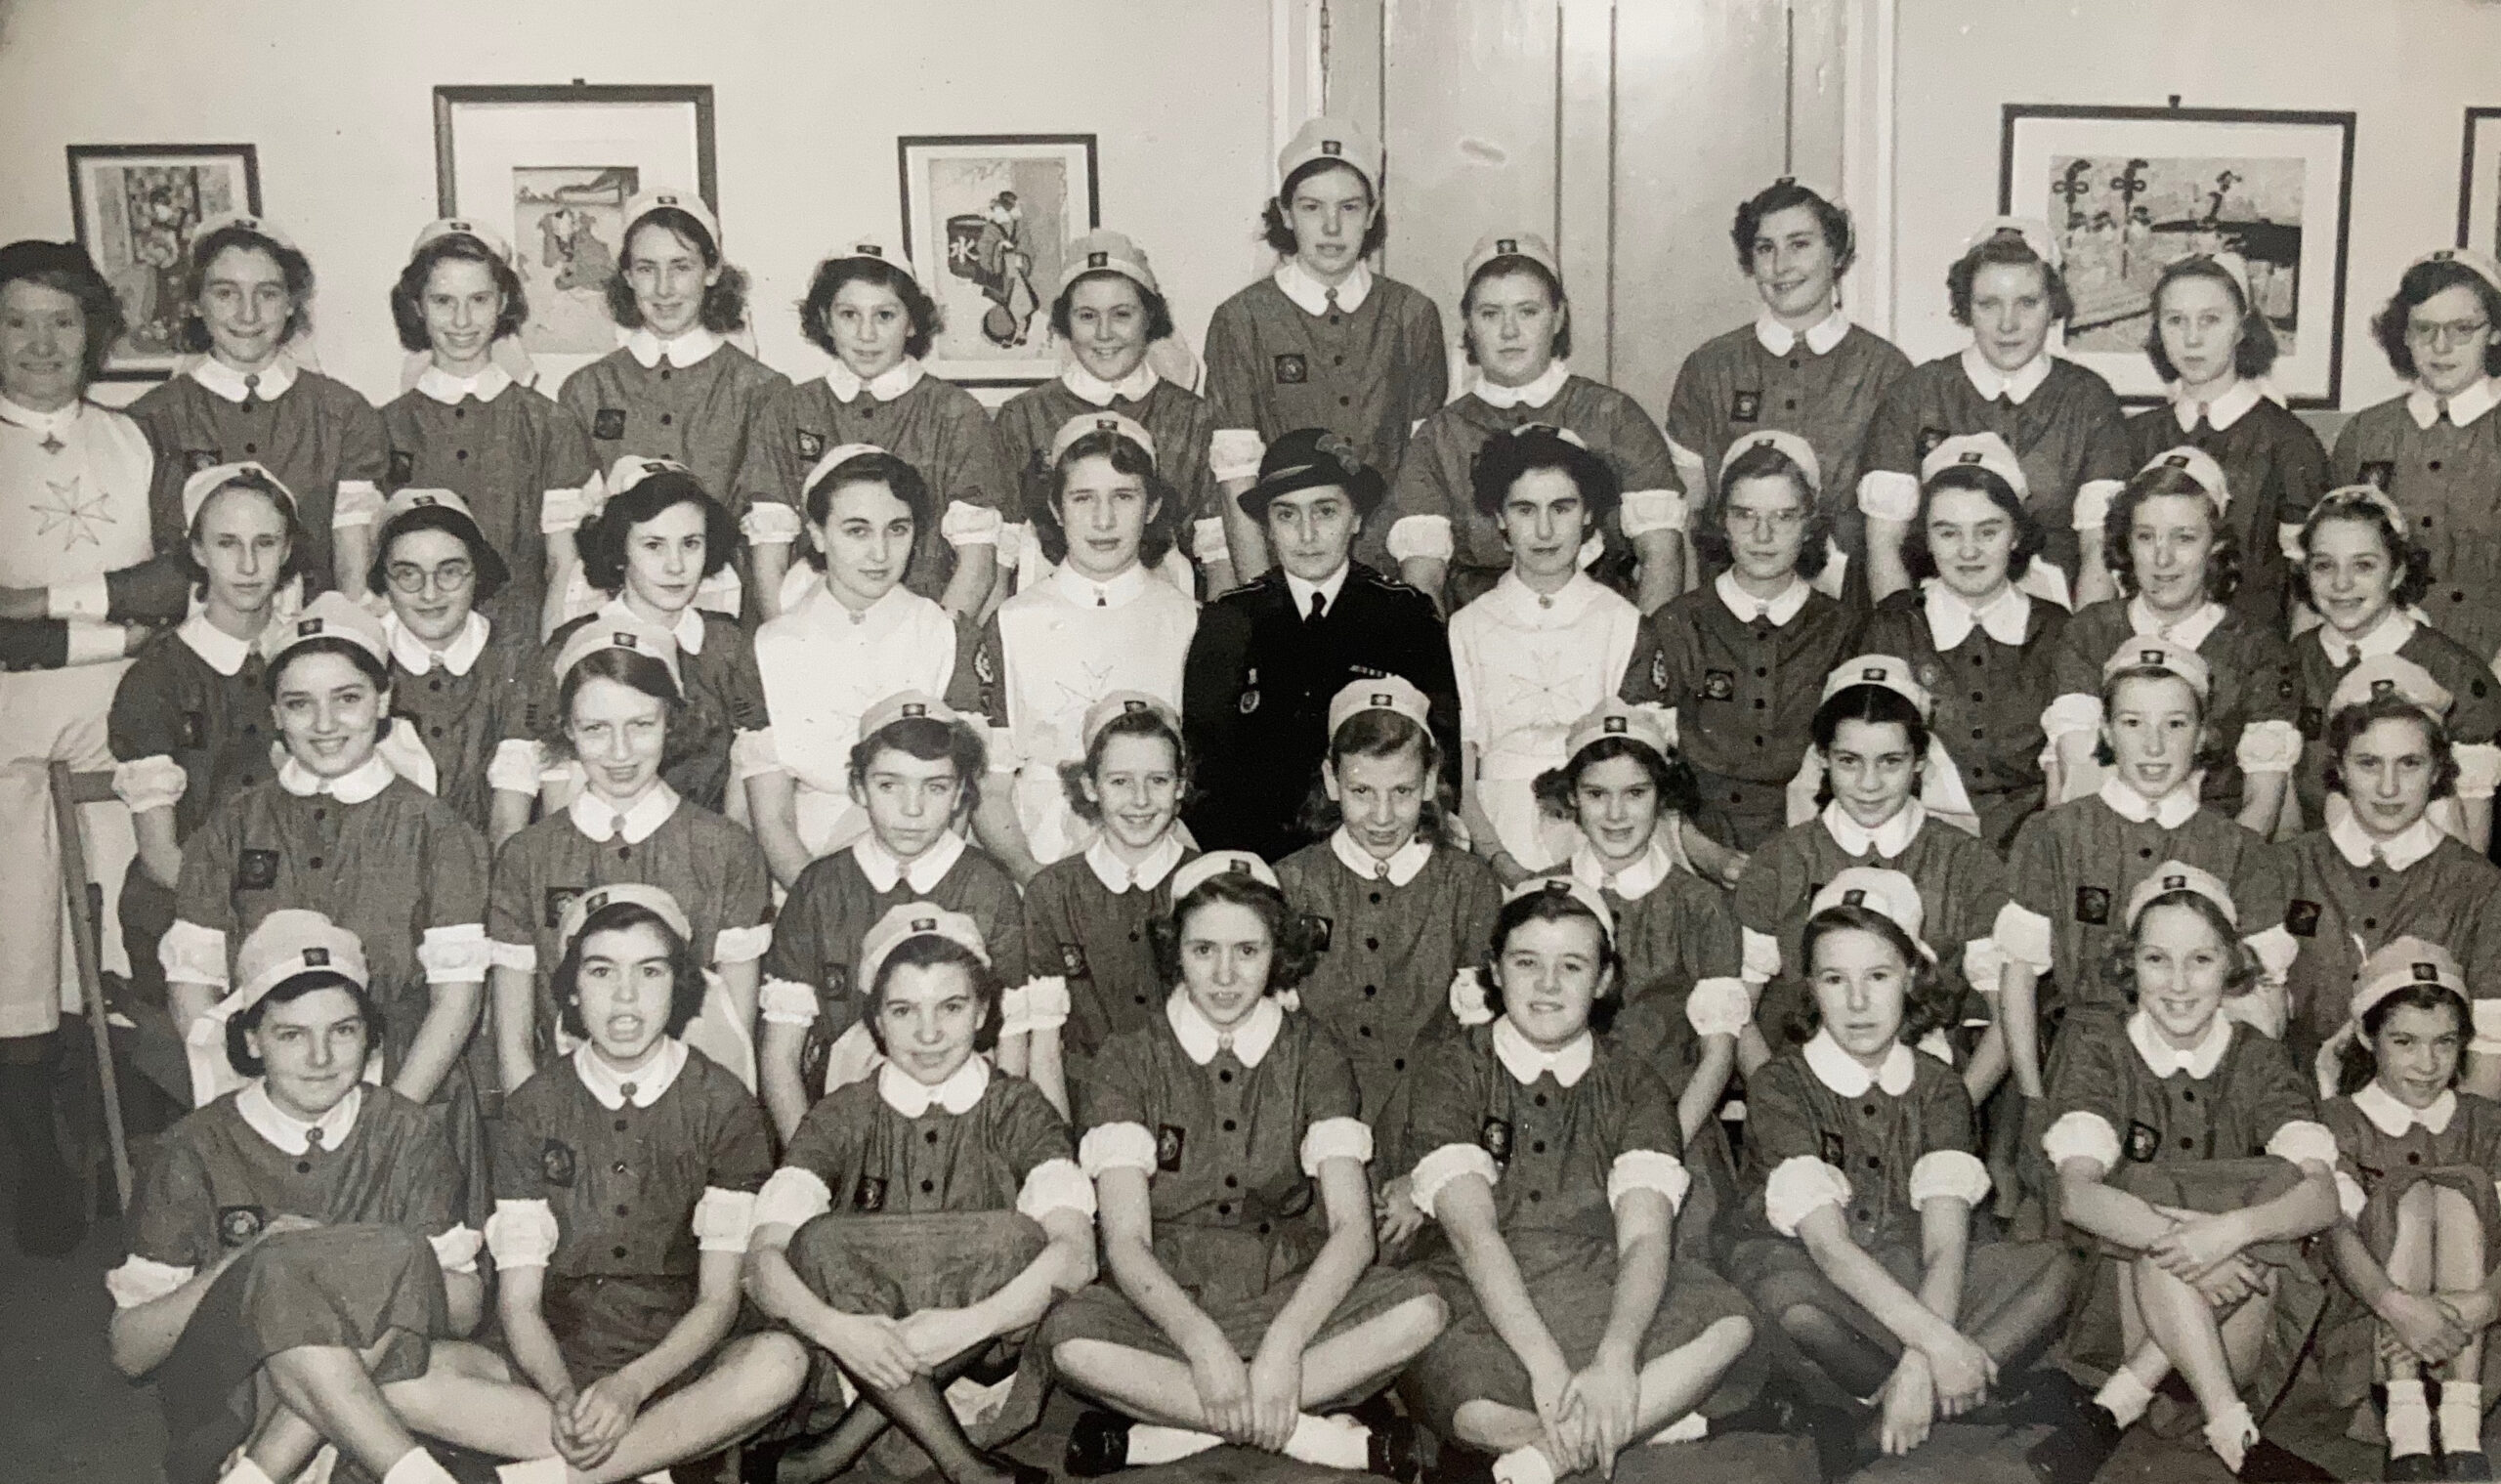 Black and white photograph of 40 young girls seated in four rows. They all wear nurse uniforms featuring white nursing caps and white cuffs. On the walls behind them are four framed pictures